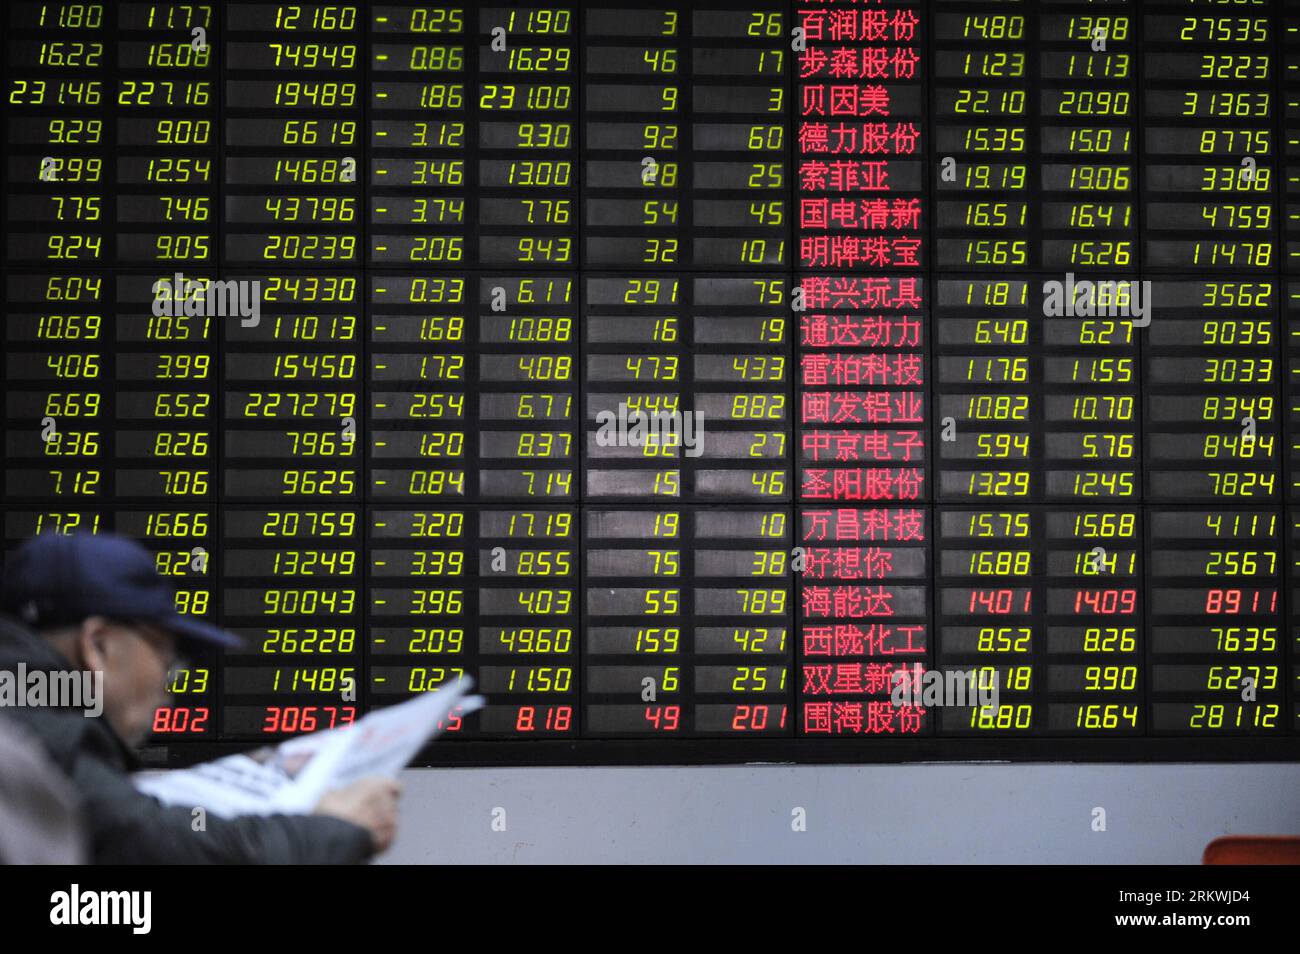 Bildnummer: 58696474  Datum: 13.11.2012  Copyright: imago/Xinhua (121113) -- HANGZHOU, Nov. 13, 2012 (Xinhua) -- An investor reads newspaper before the stock price monitor at a stock trading hall in Hangzhou, capital of east China s Zhejiang Province, Nov. 13, 2012. Chinese stocks experienced a decline on Tuesday. The benchmark Shanghai Composite Index dropped 1.51 percent, to close at 2,047.89 points. The Shenzhen Component Index ended at 8,234.60 points, down 1.87 percent. (Xinhua/Ju Huanzong) (zc) CHINA-STOCKS-DOWN (CN) PUBLICATIONxNOTxINxCHN Wirtschaft Börse Kurs Aktien Aktienkurs Börsenku Stock Photo